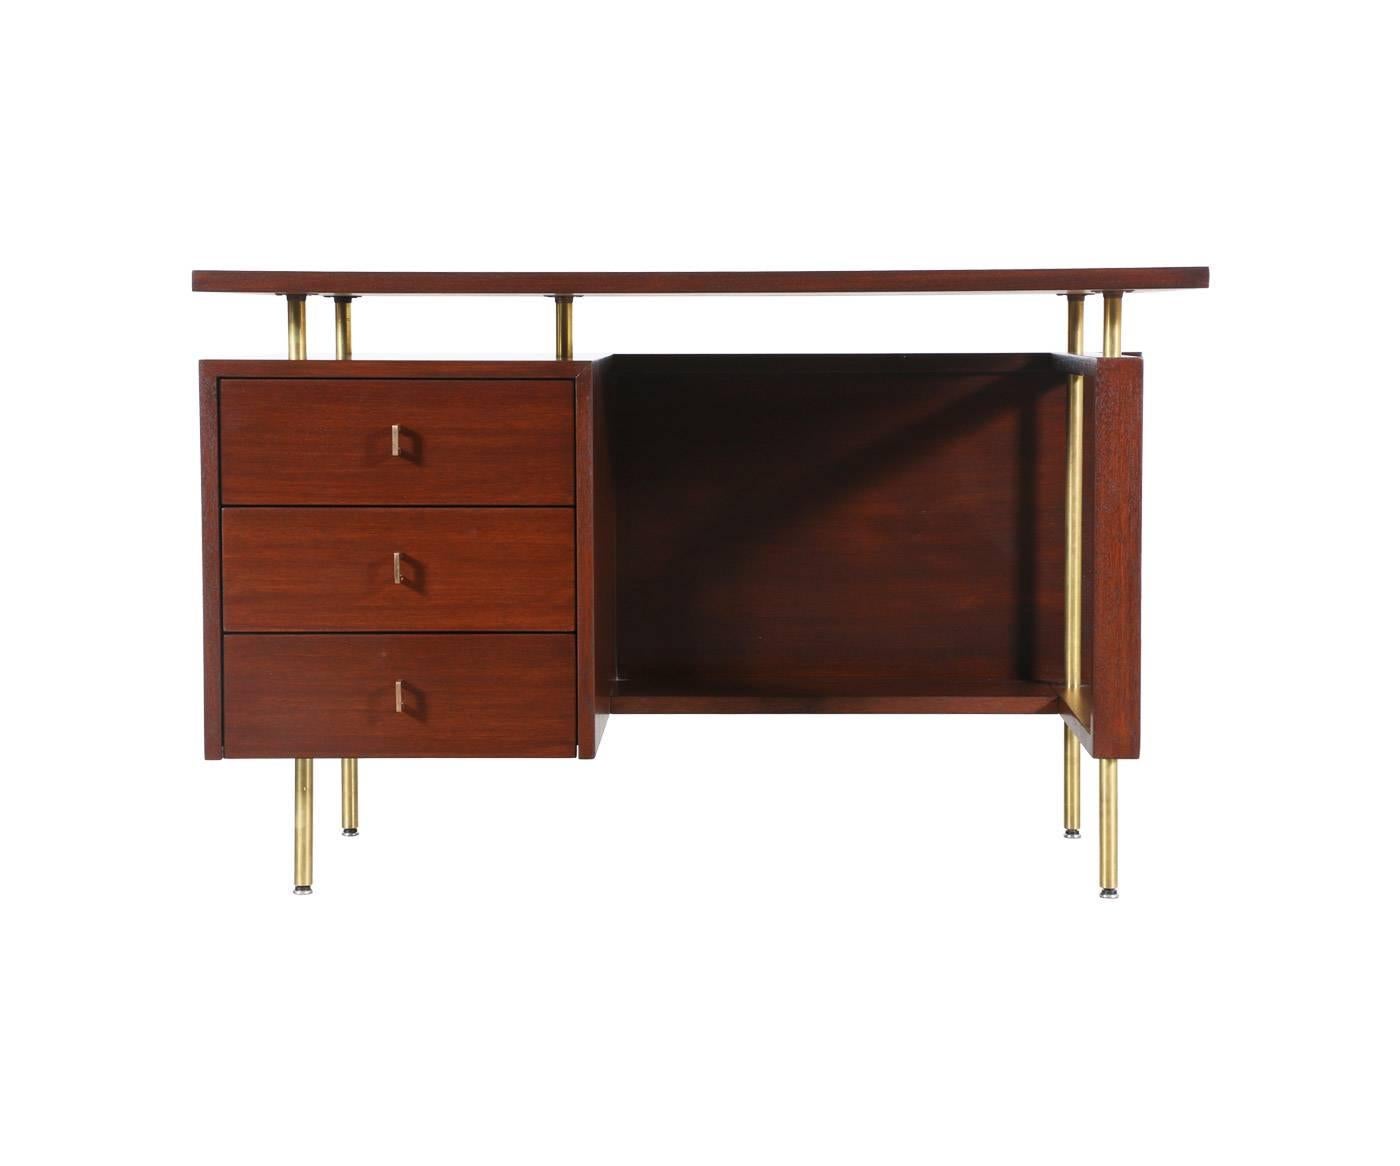 Designer: John Keal.
Manufacturer: Brown Saltman.
Period/Style: Mid-Century Modern
Country: United States.
Date: 1960s.

Dimensions: 29.5″ H x 46″ W x 23.75″ D.
Materials: Mahogany, poilished brass.
Condition: Excellent, newly